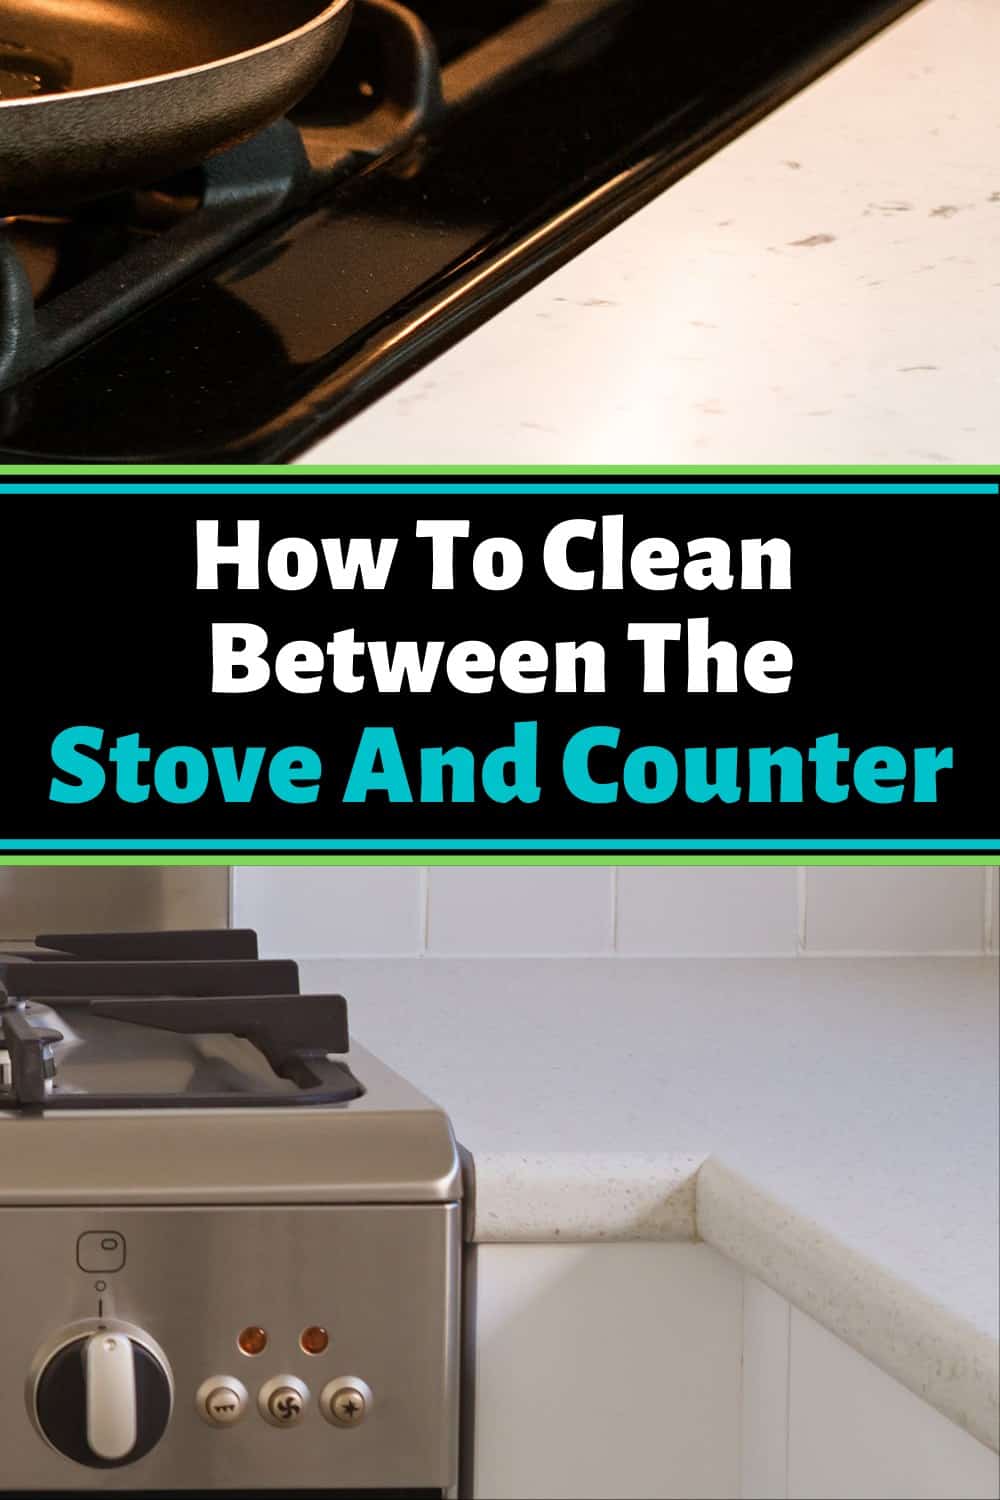 Use A Scraper To Clean the Gap Between Stove And Counter